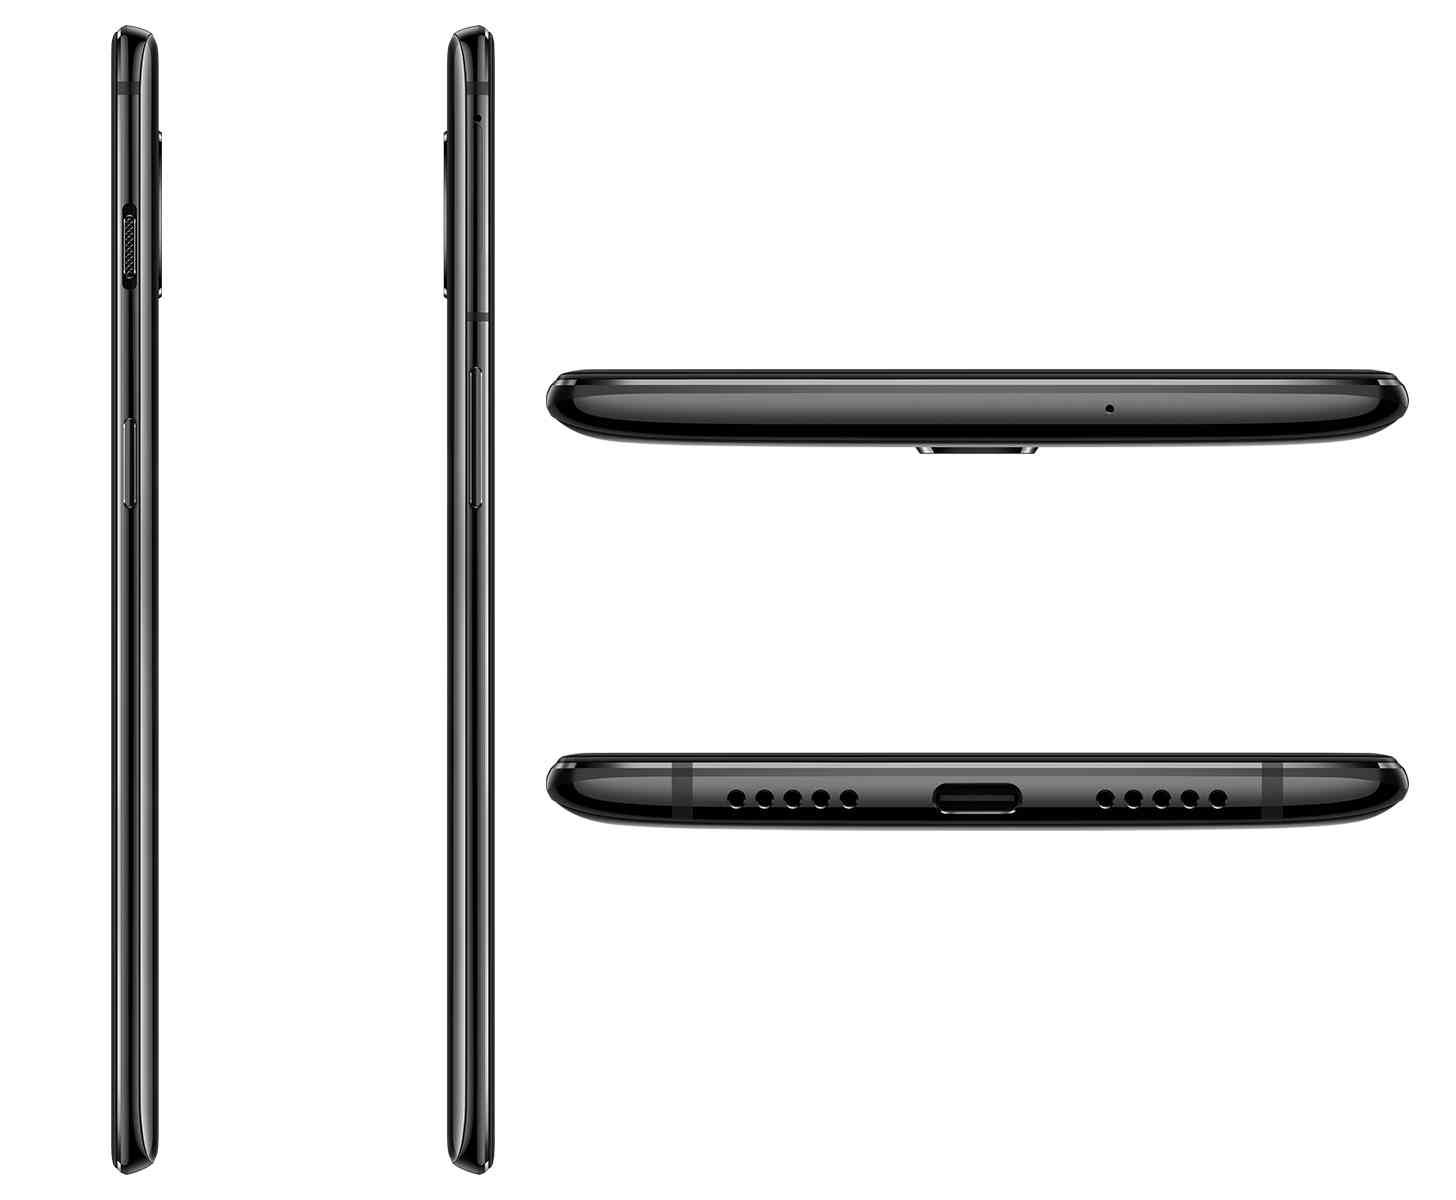 OnePlus 6T official sides